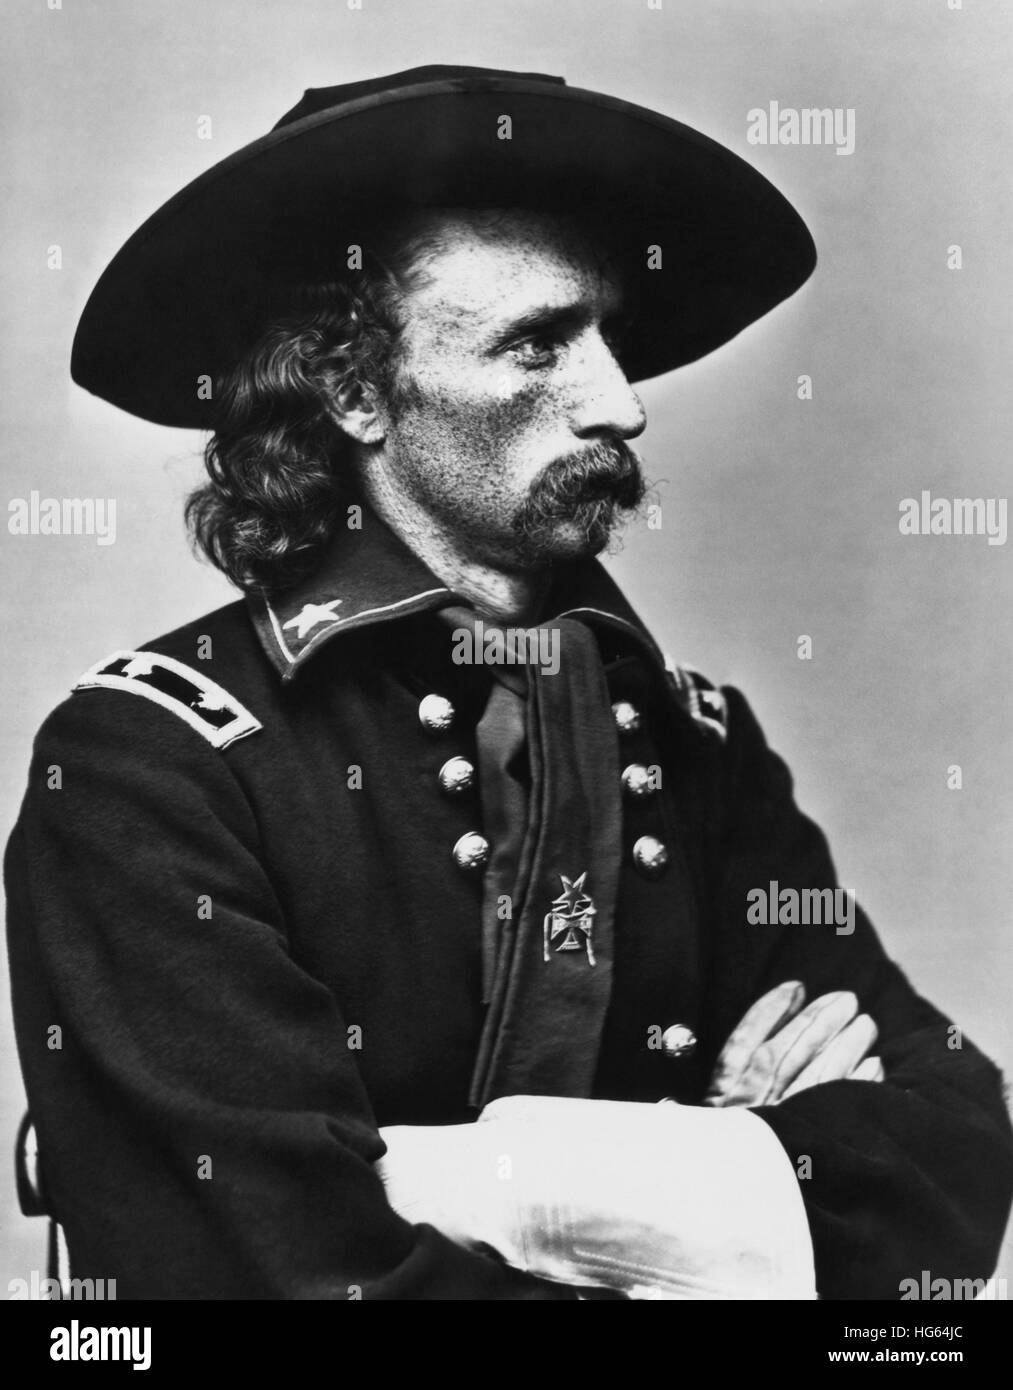 Vintage American Civil War photo of Major General George Armstrong Custer. Stock Photo